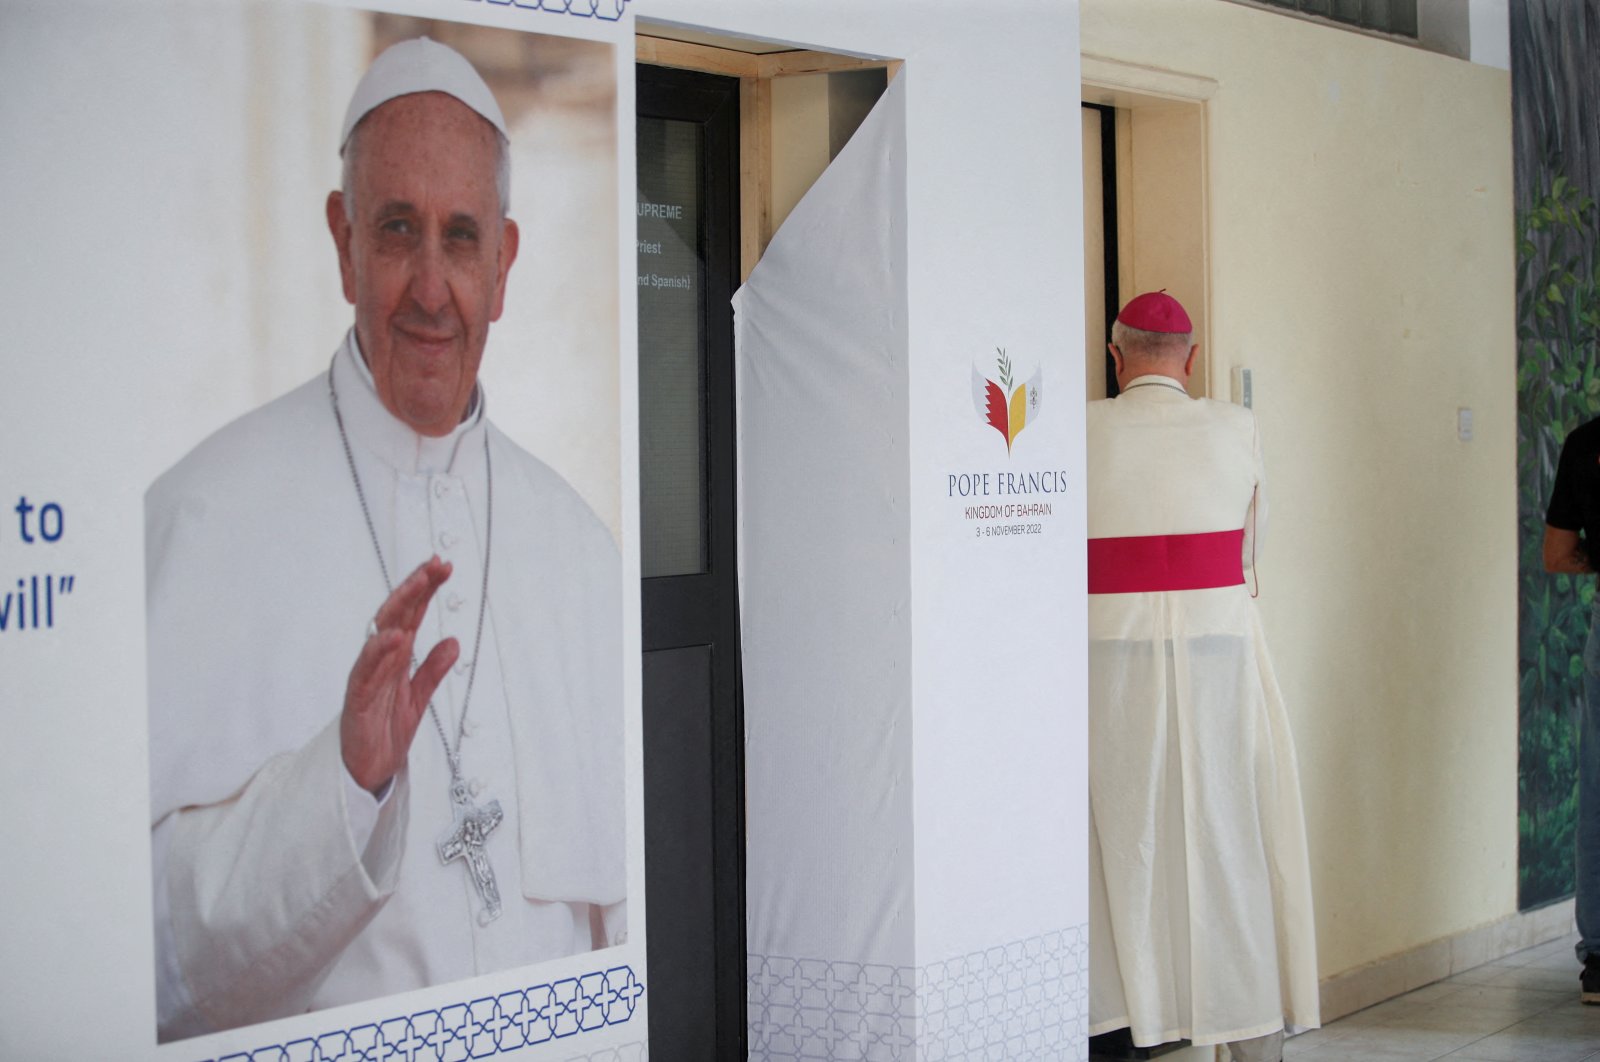 A priest walks into his office at Sacred Heart Catholic Church, one of the places Pope Francis will be visiting during his three-day visit, in Manama, Bahrain, Nov. 1, 2022. (Reuters Photo)